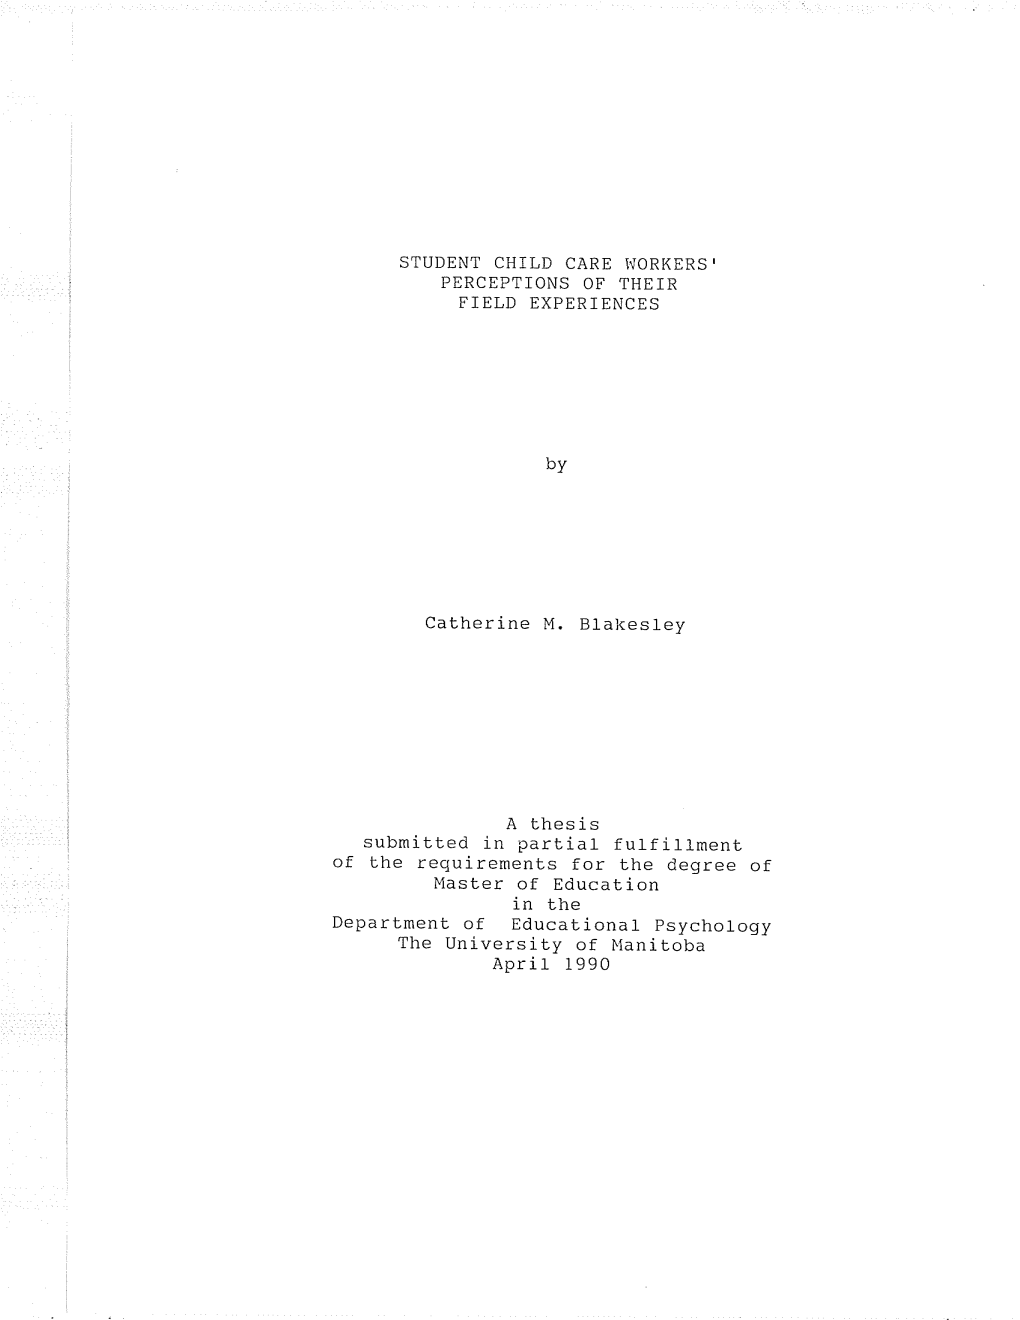 Submitted in Partial Fulfillment in the the University of Tlanitoba Aprii 1990